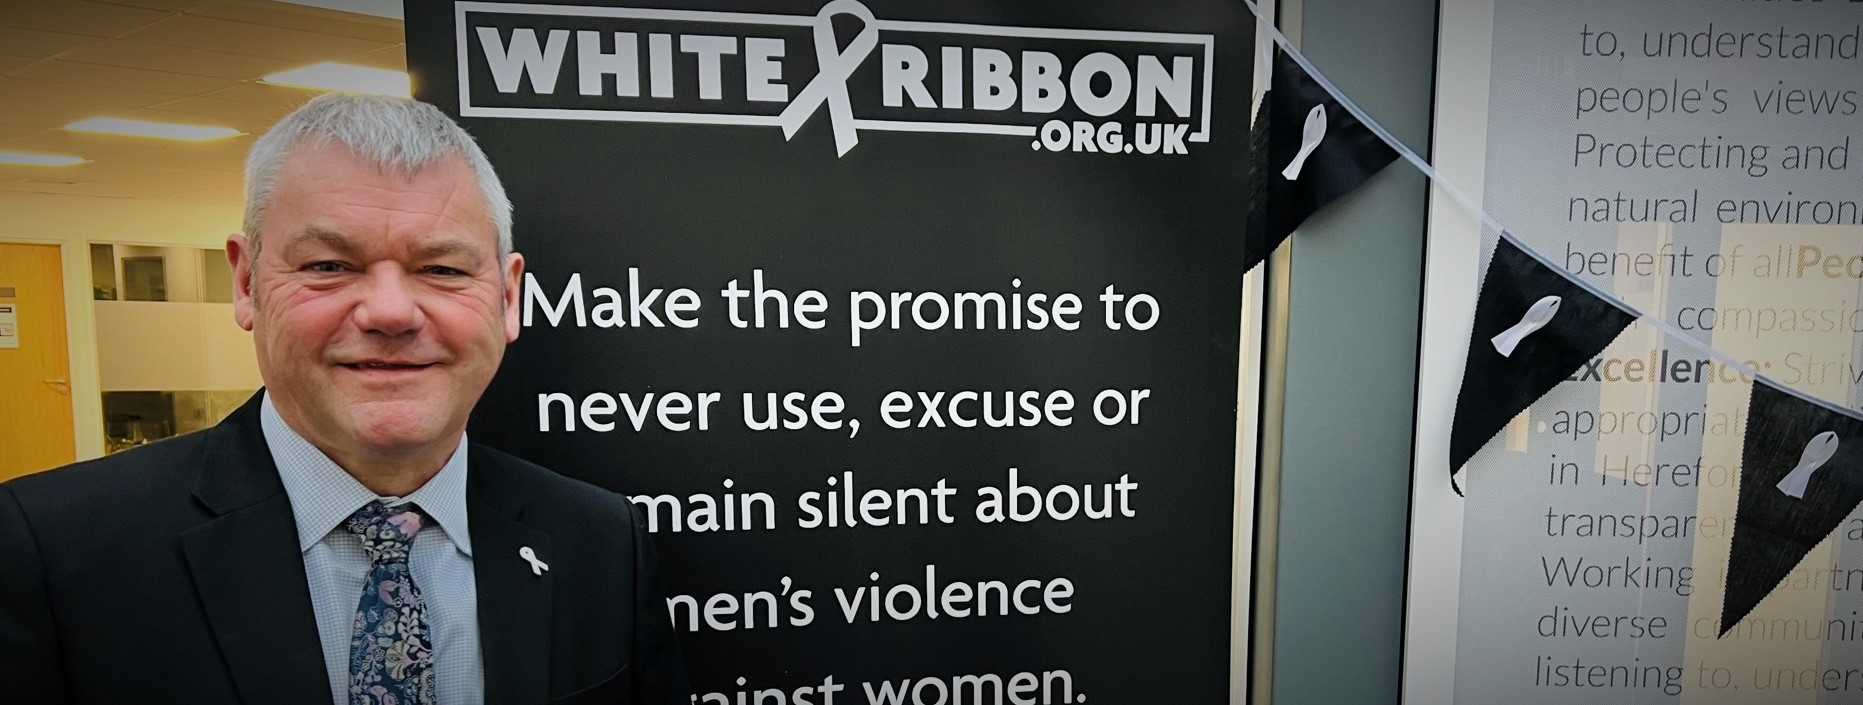 Paul Walker proud Herefordshire Council is White Ribbon accredited